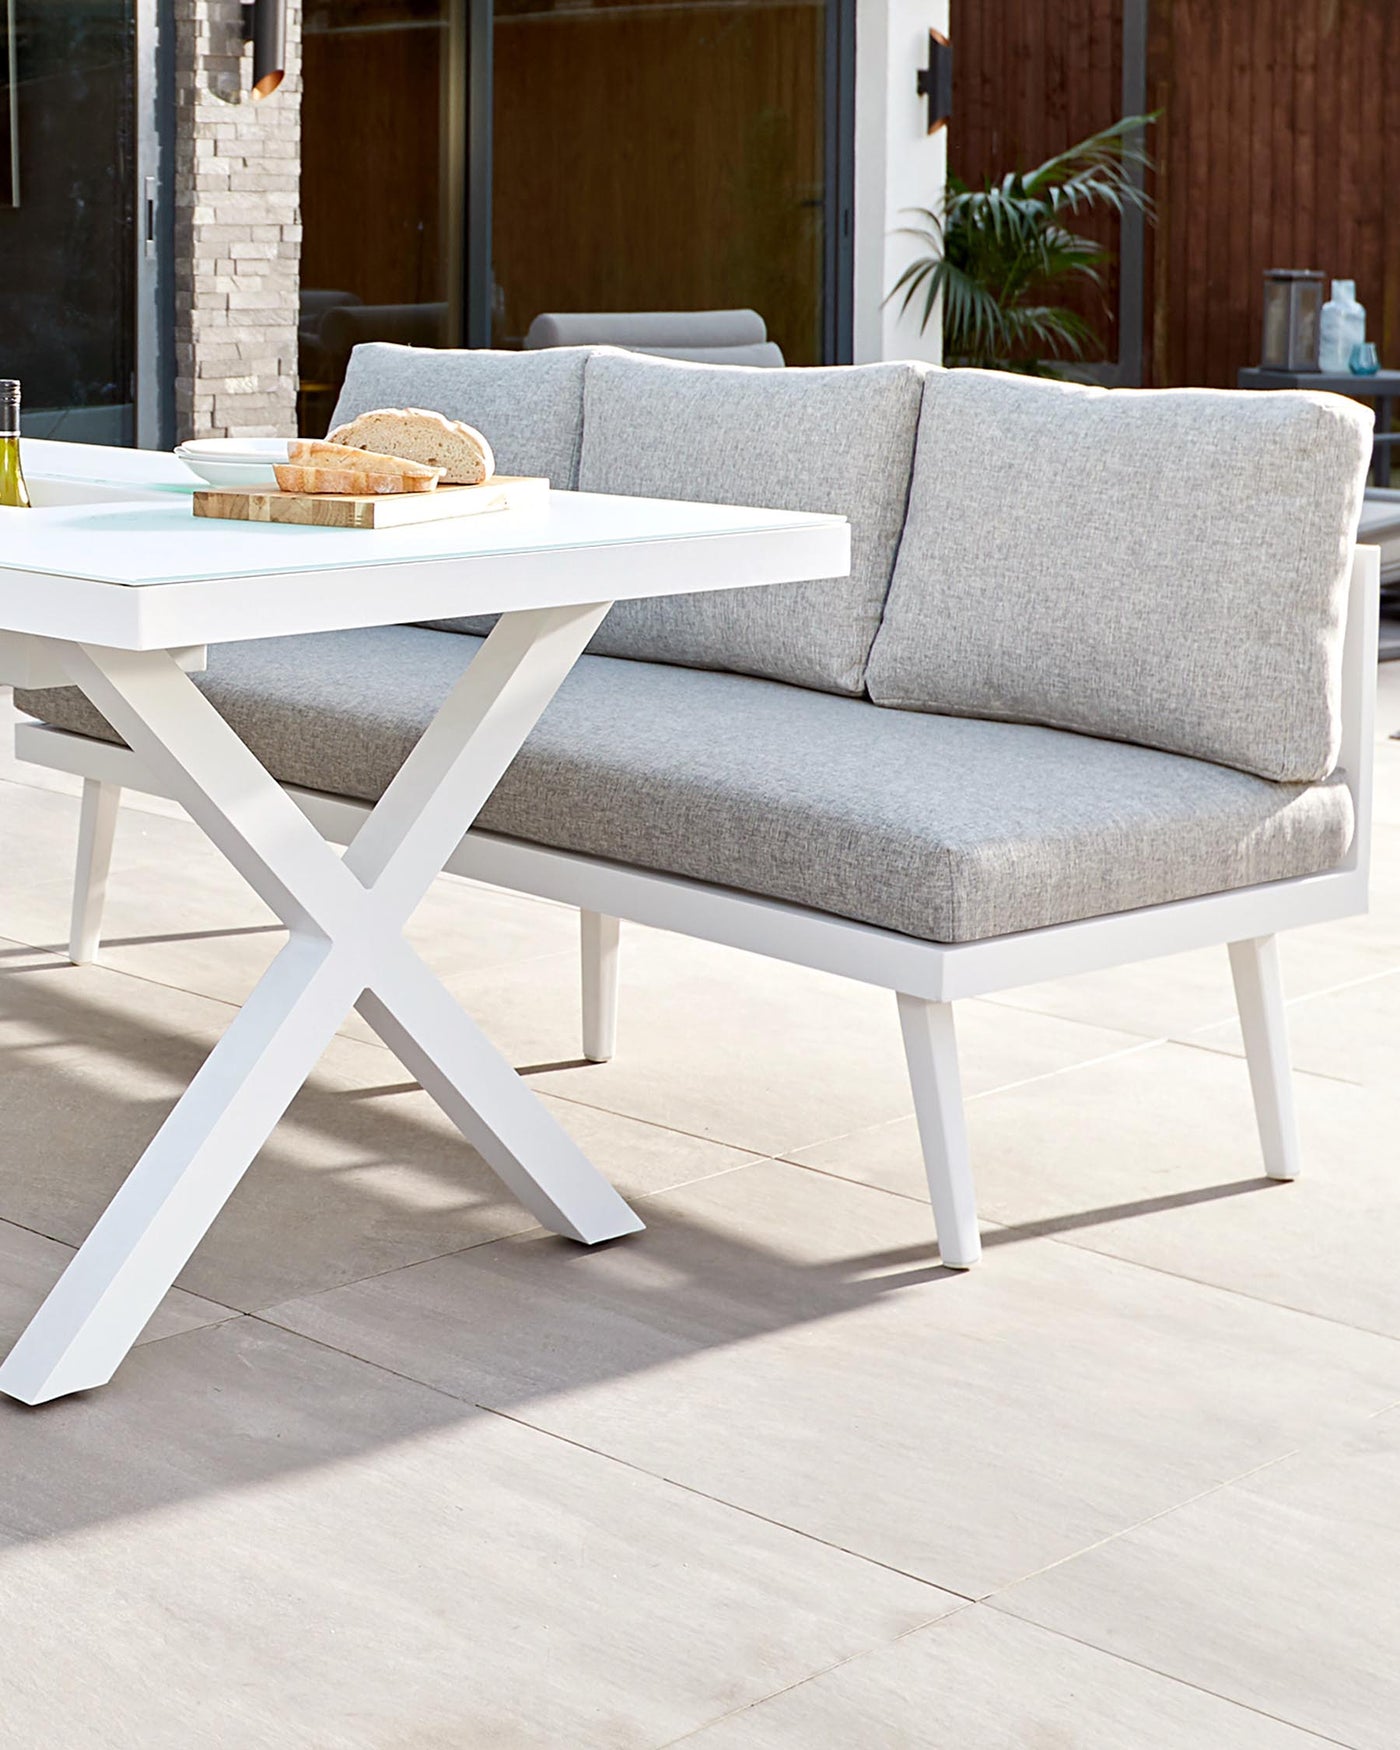 Modern outdoor furniture featuring a white rectangular coffee table with a unique X-shaped base, paired with a grey cushioned bench with a sleek white frame. The setting suggests a comfortable and stylish patio arrangement.